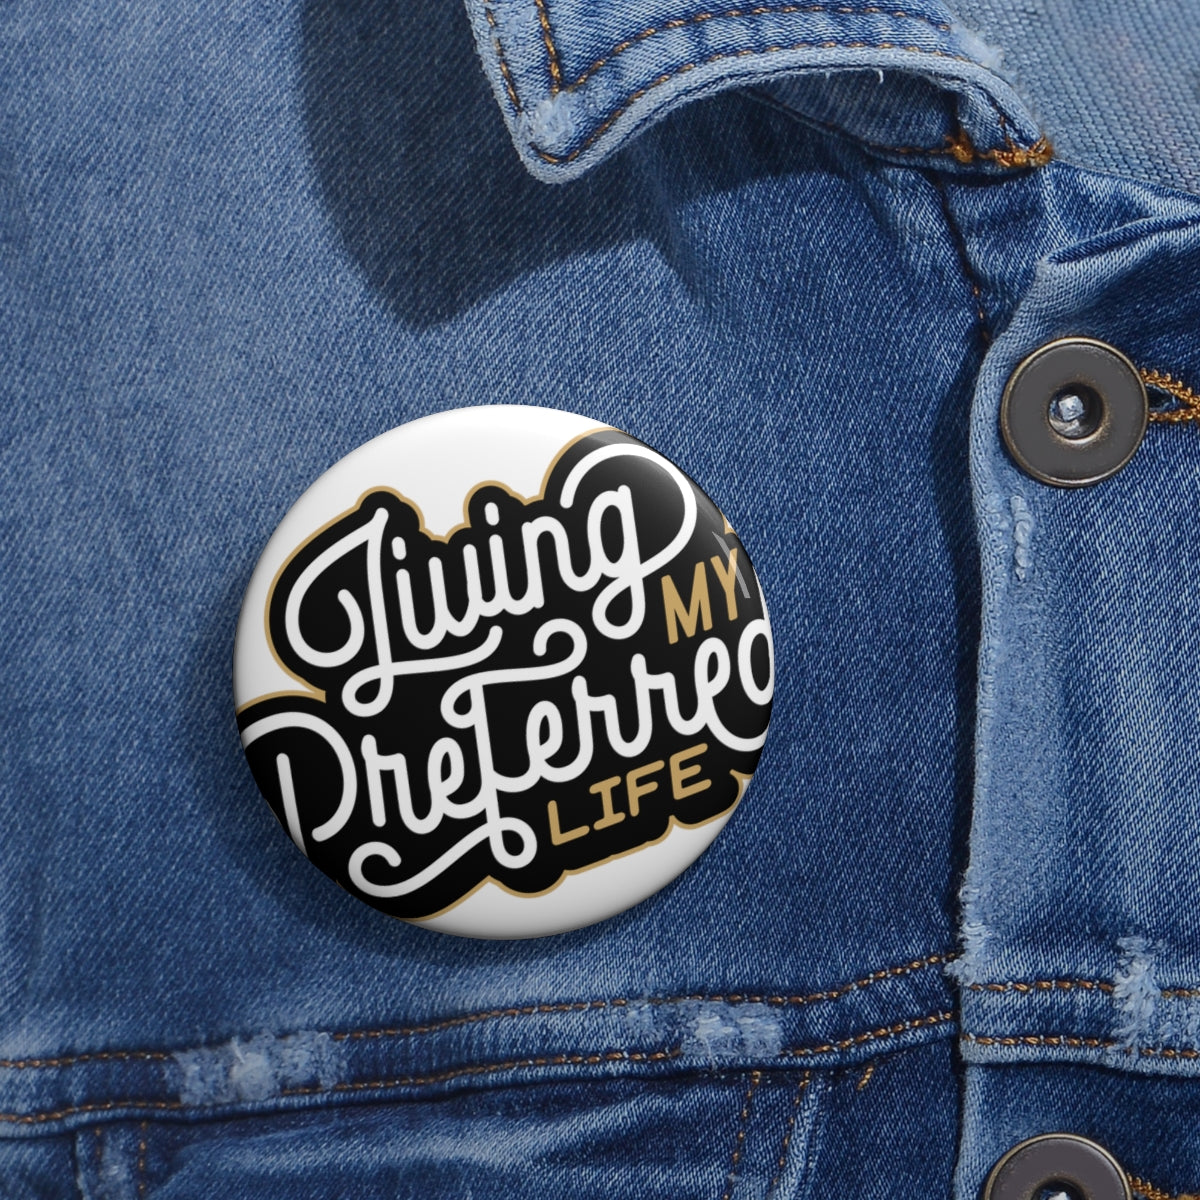 Client's Living My Preferred Life - Custom Pin Buttons